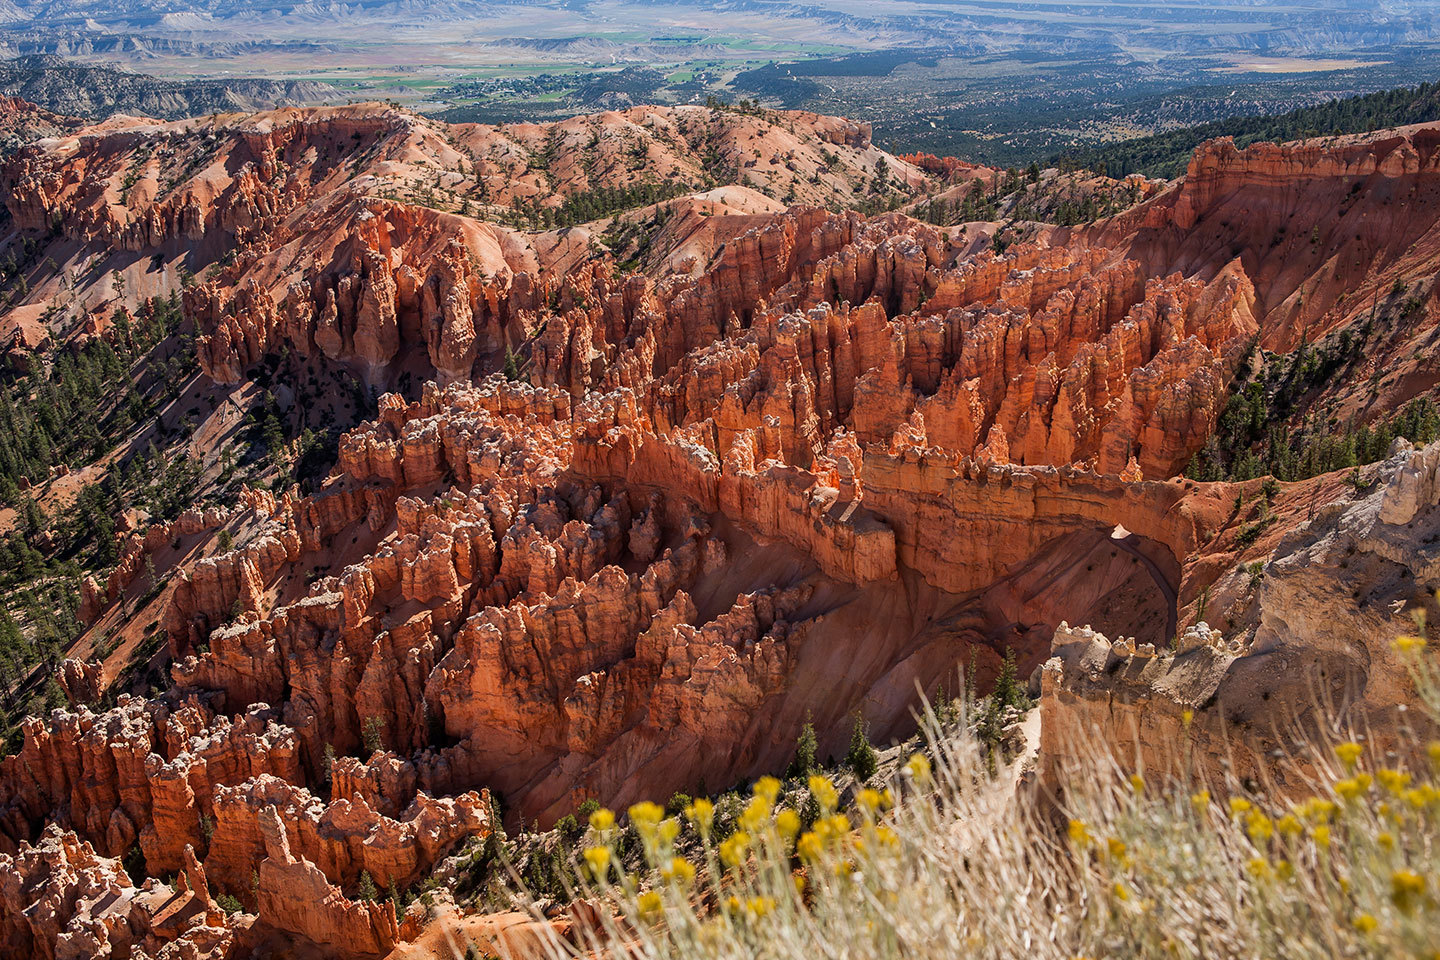 Views over Bryce Canyon National Park in Utah